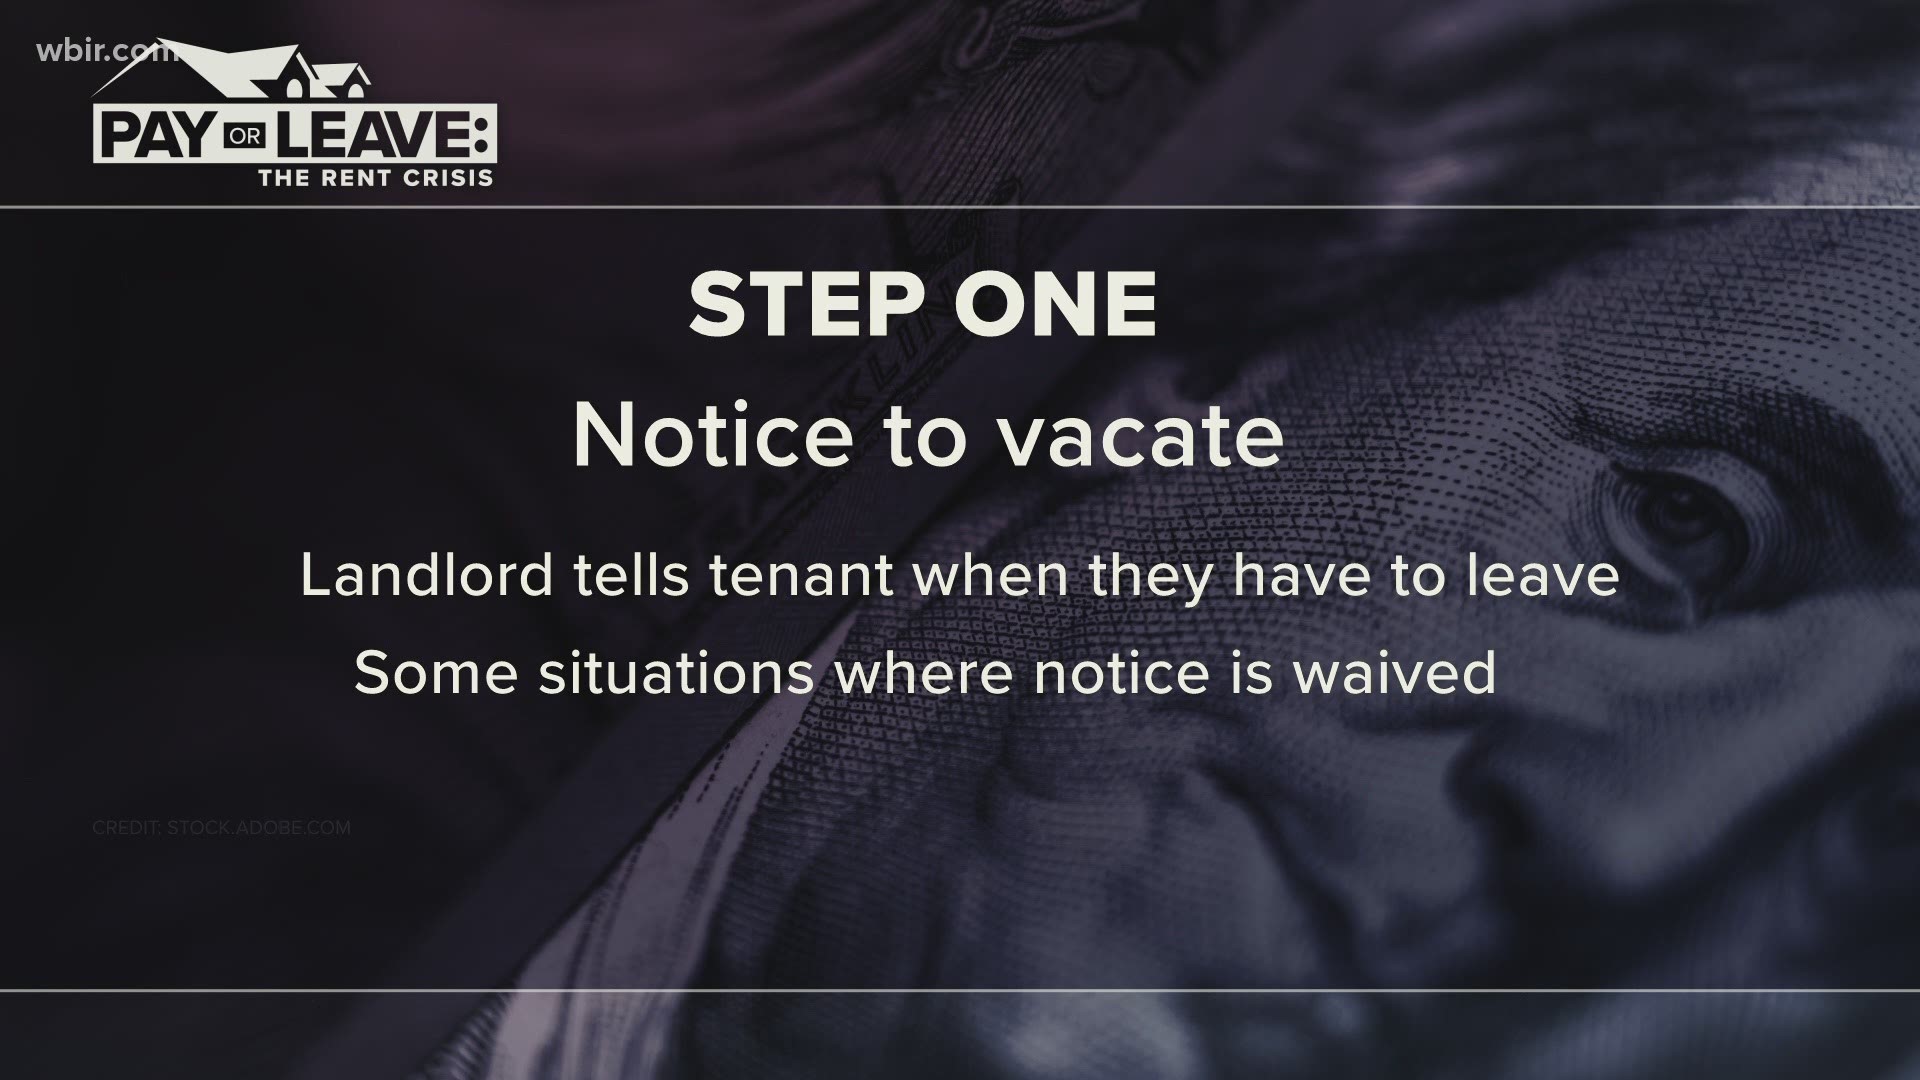 Legal Aid of East Tennessee and the City of Knoxville says landlords need to take a series of steps before renters have to leave their homes.